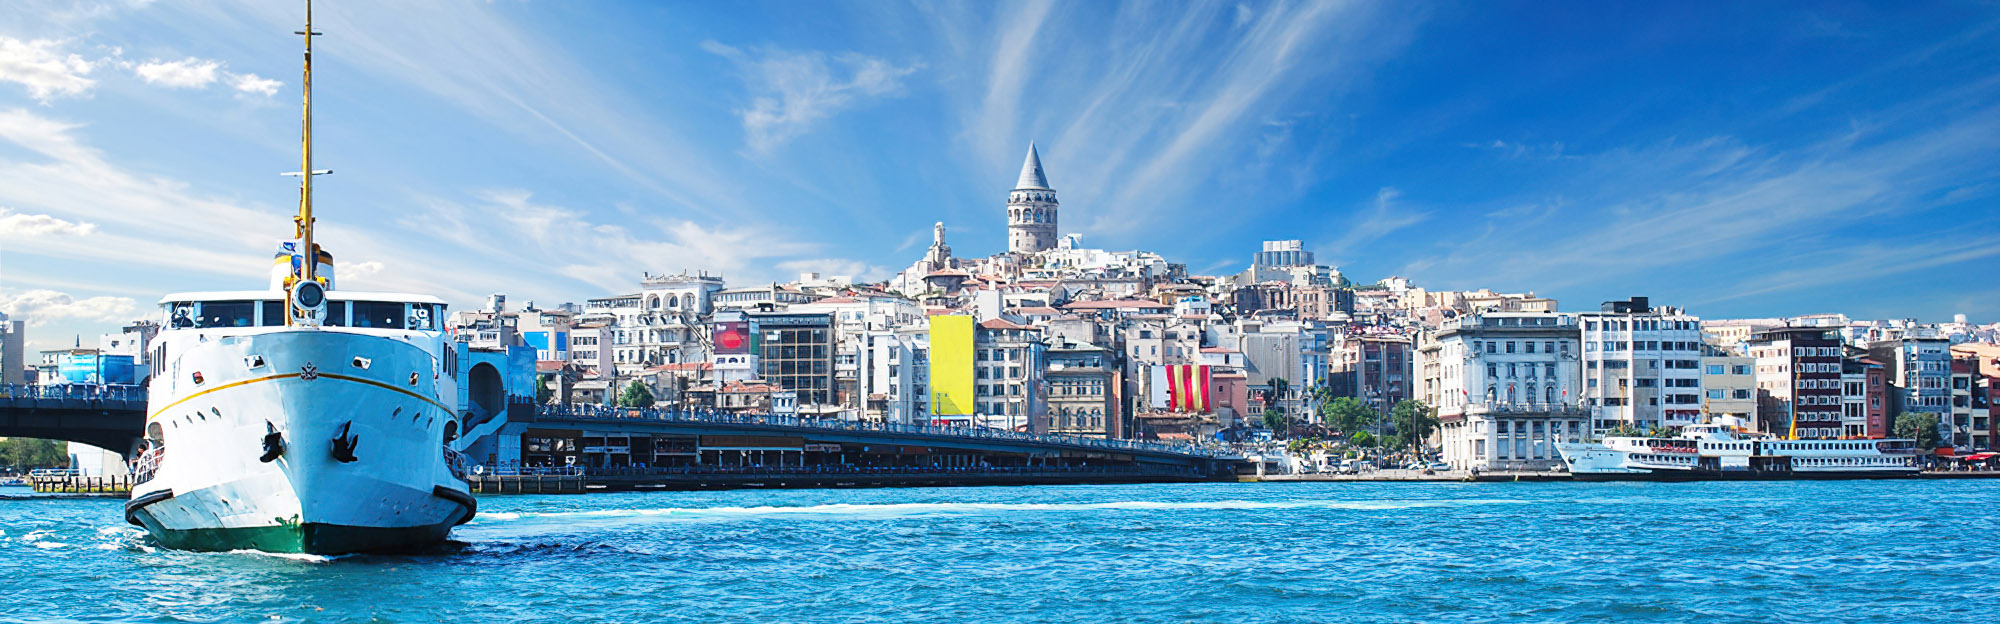 activities to do in Istanbul